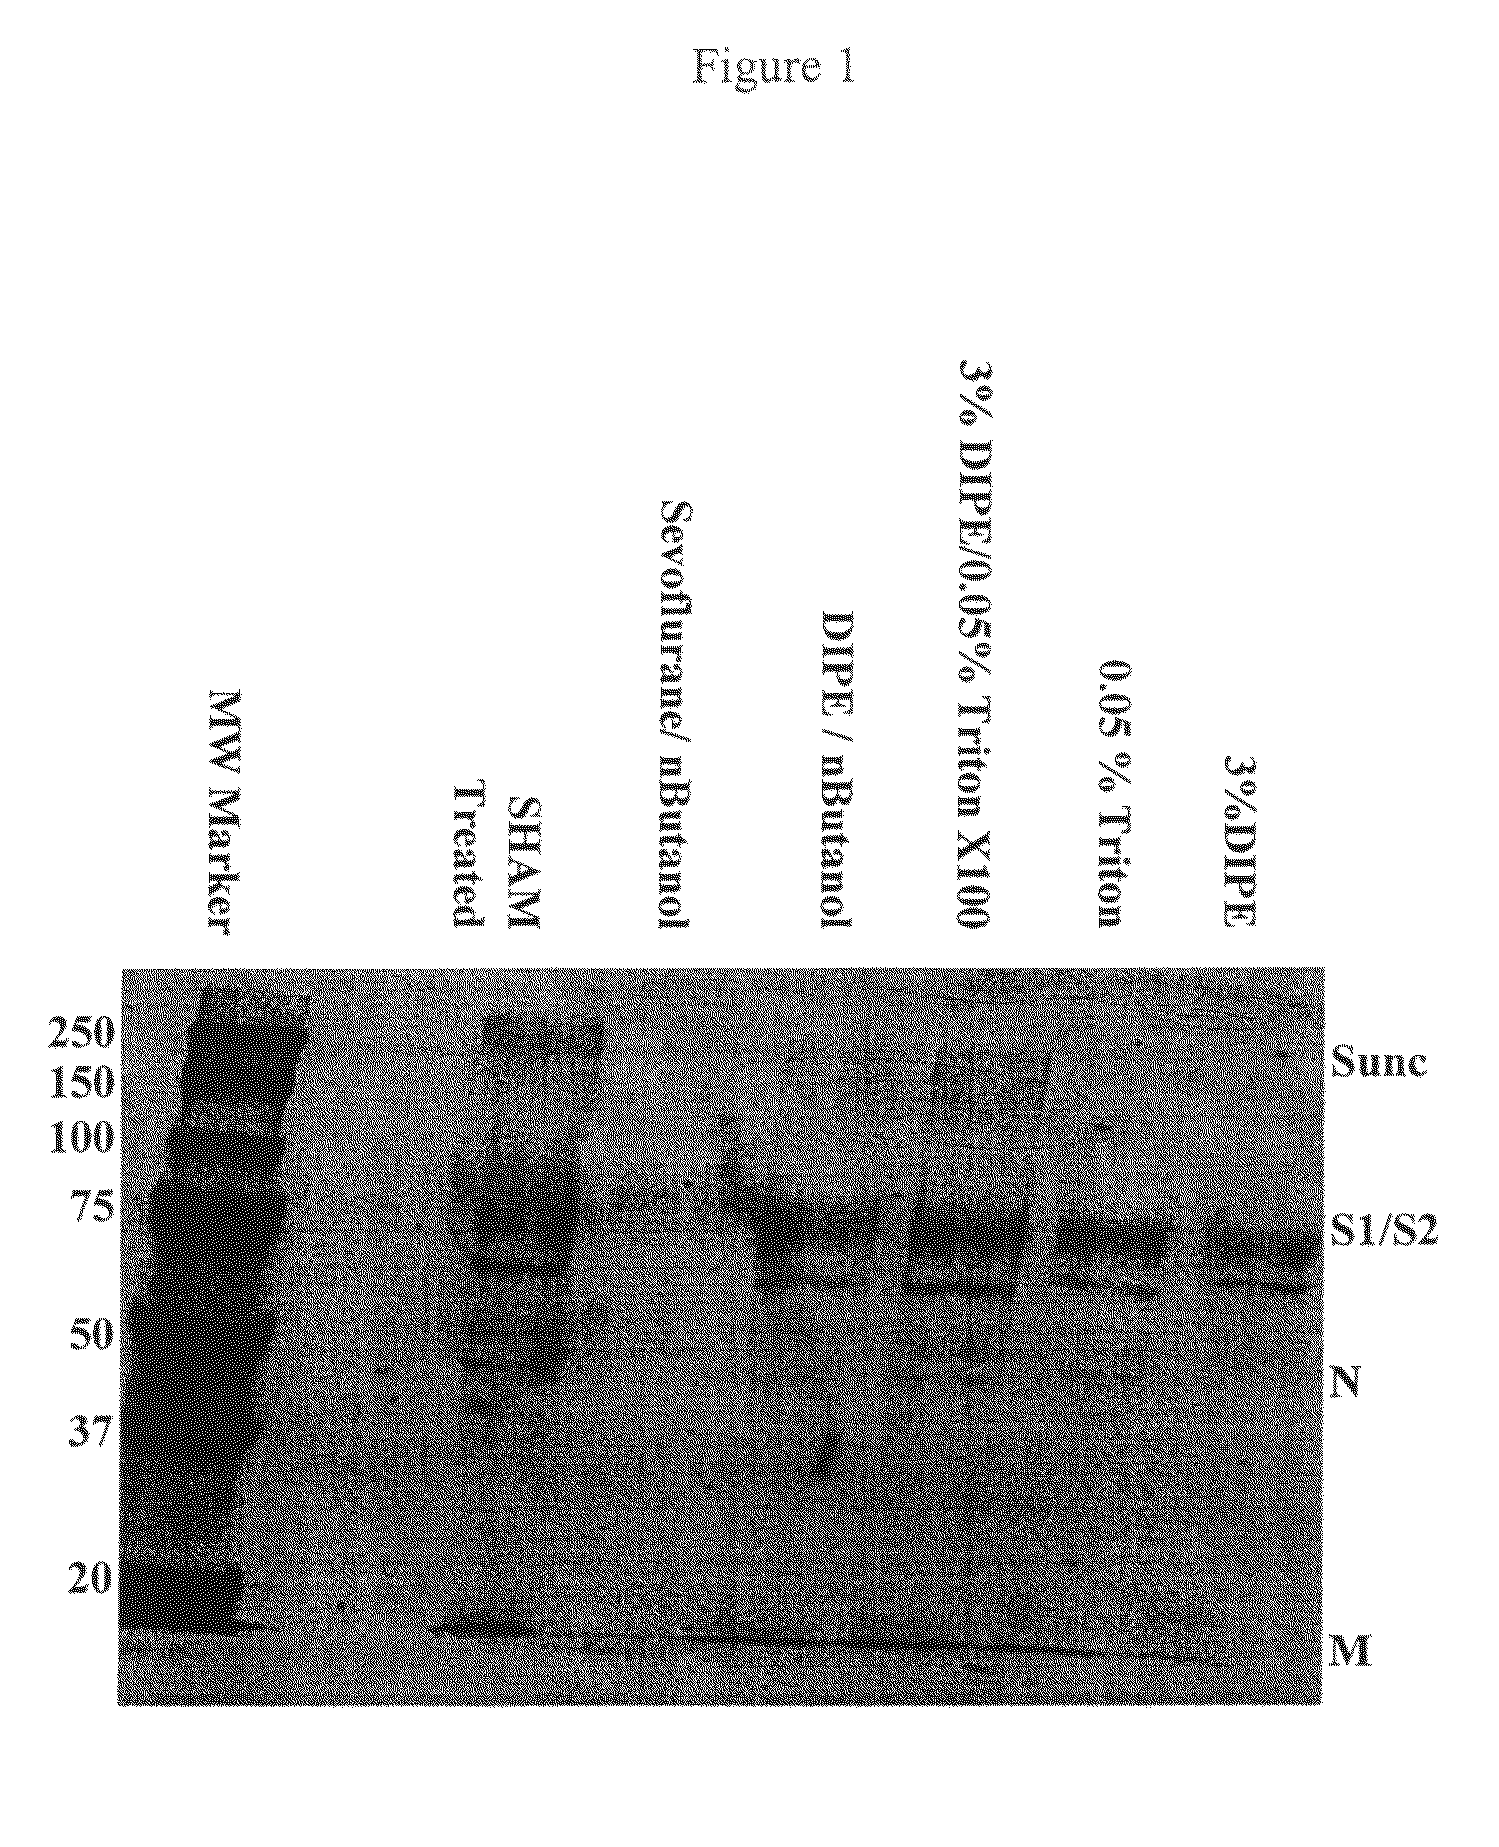 SARS vaccine compositions and methods of making and using them